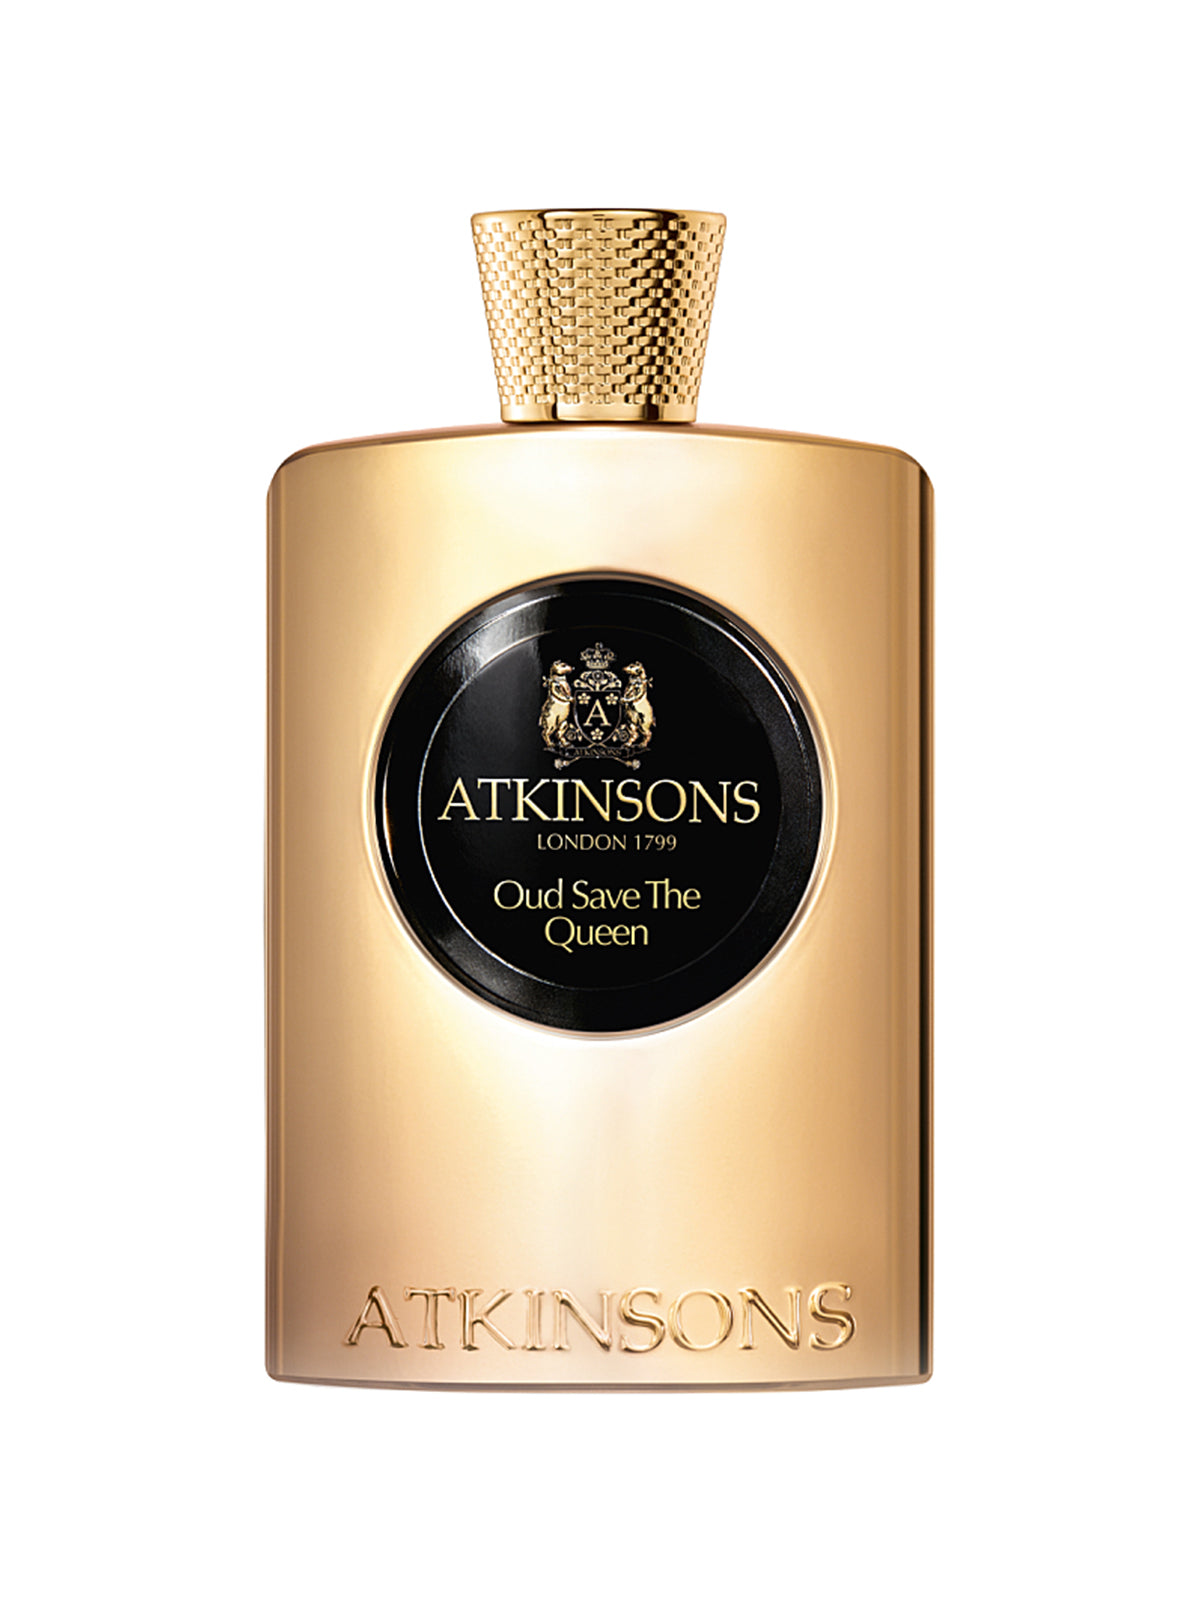 ATKINSONS LONDON 1799 OUD SAVE THE QUEEN 100ML